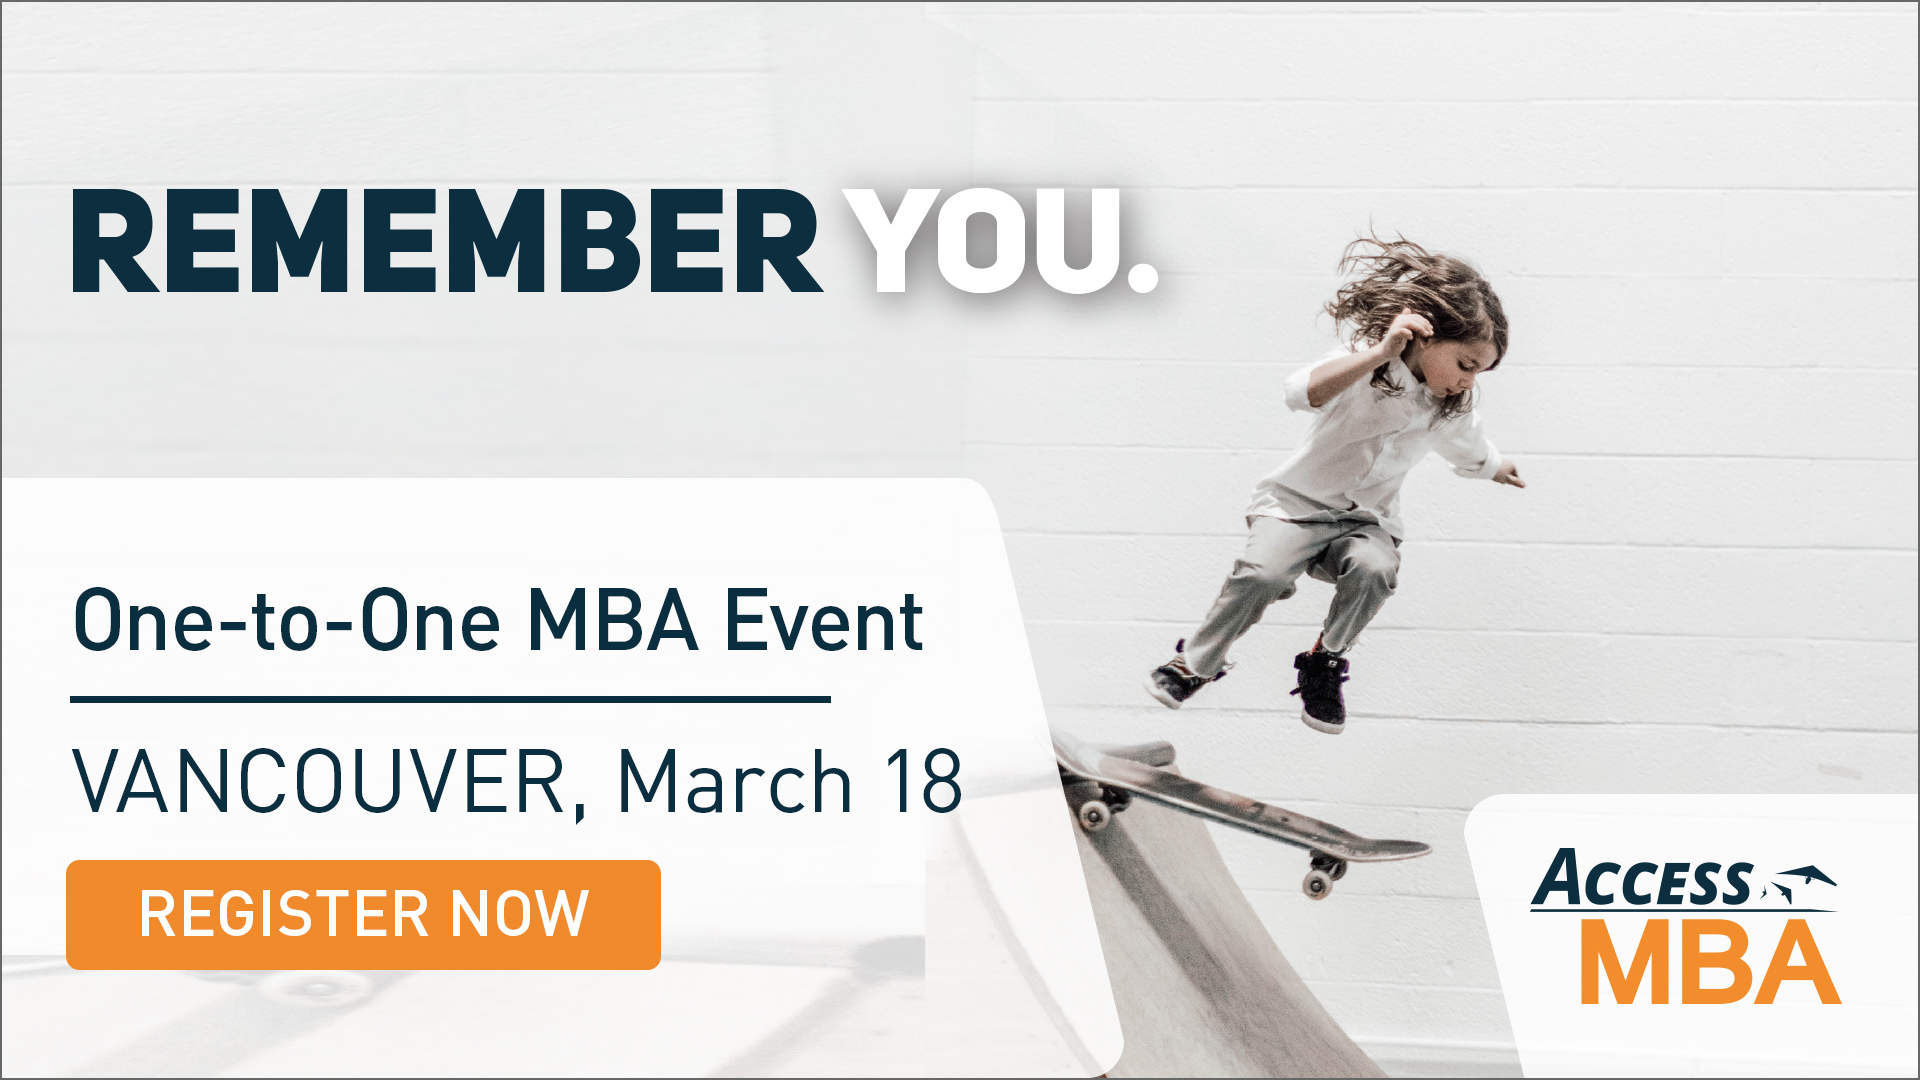 Exclusive MBA Event in Vancouver on the March 18th, Vancouver, British Columbia, Canada